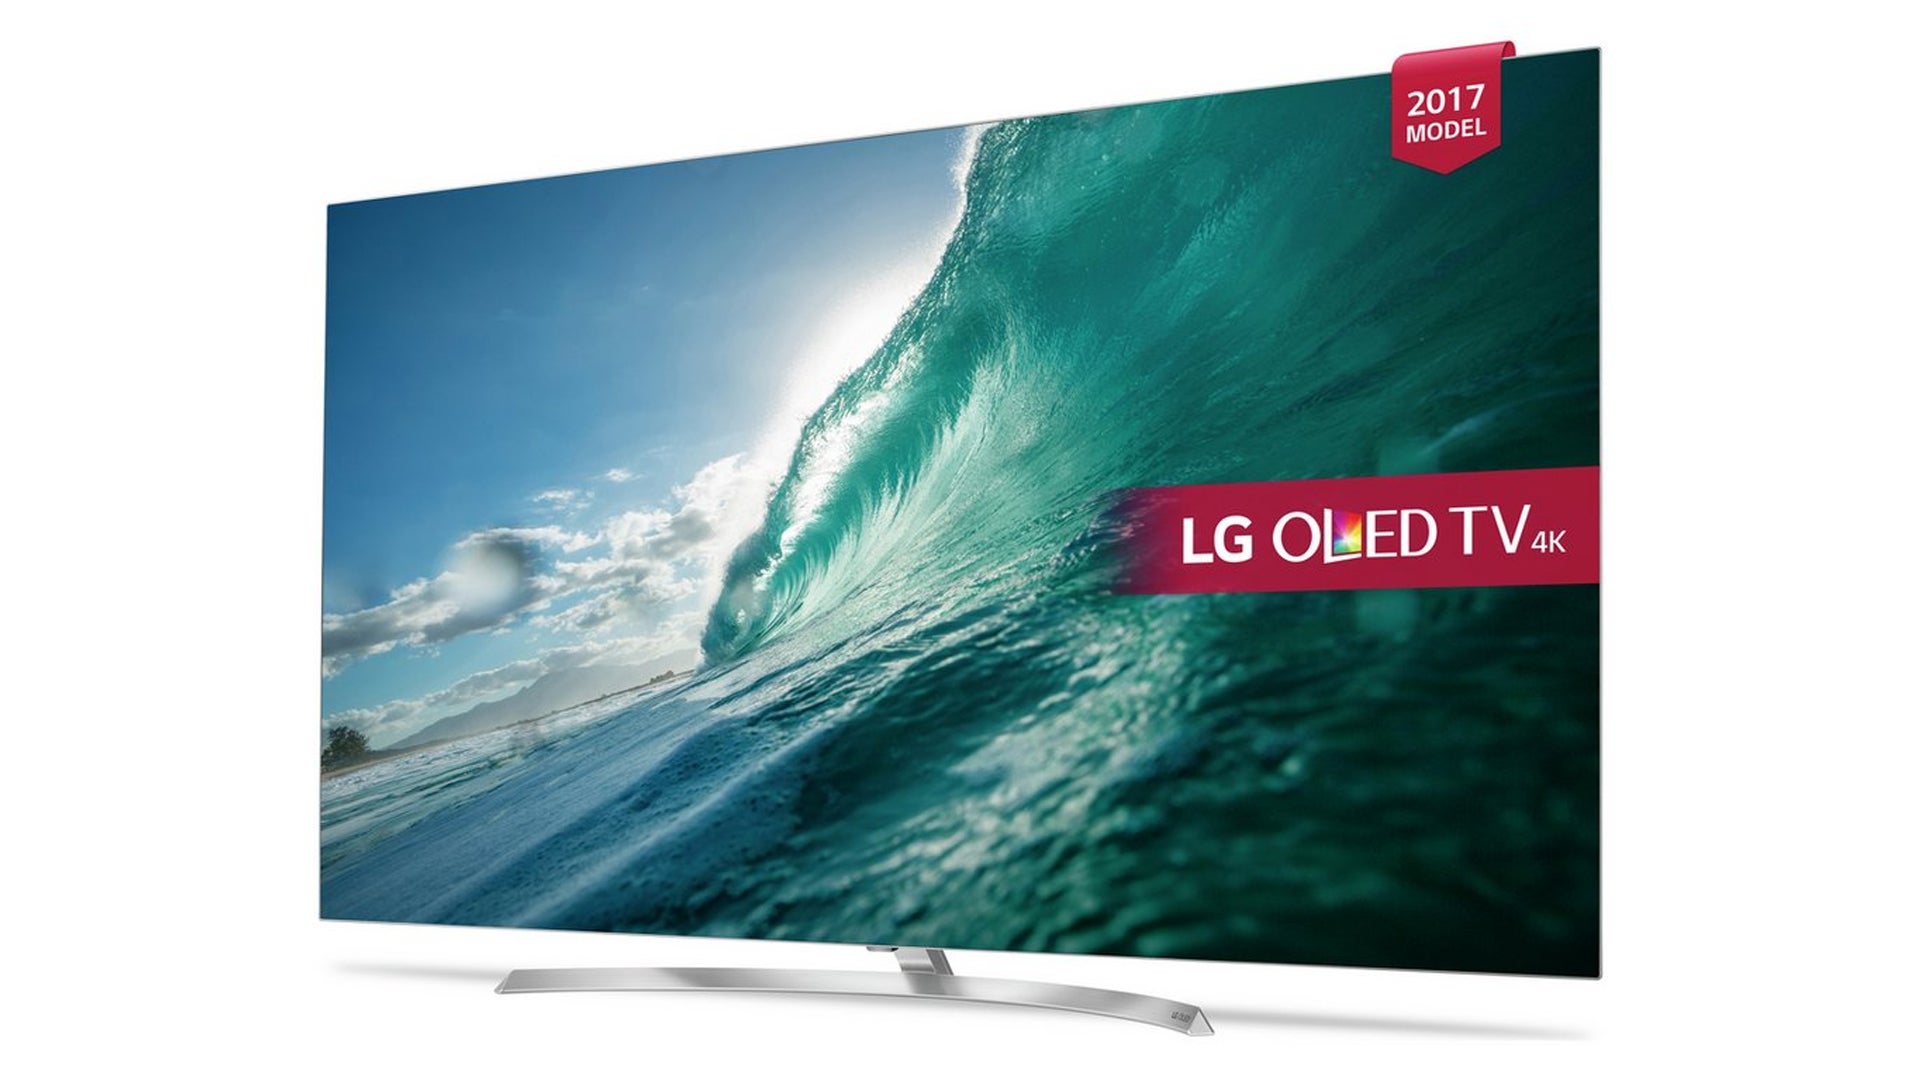 Image for LG's 55-inch OLED 4K TV down to its lowest price yet